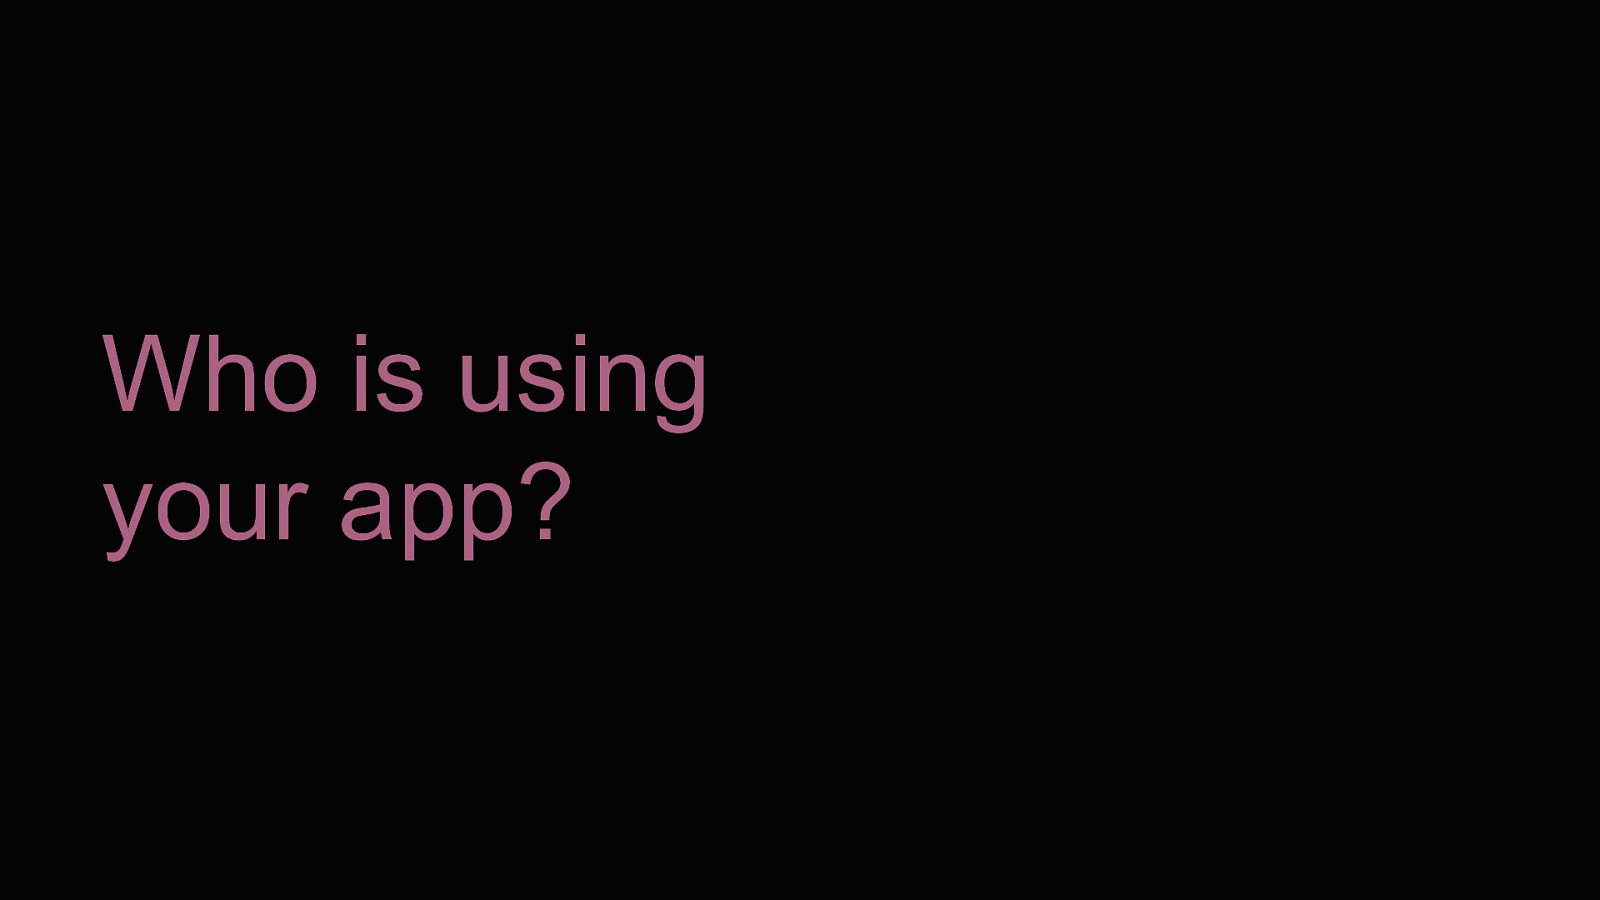 Who is using your app?